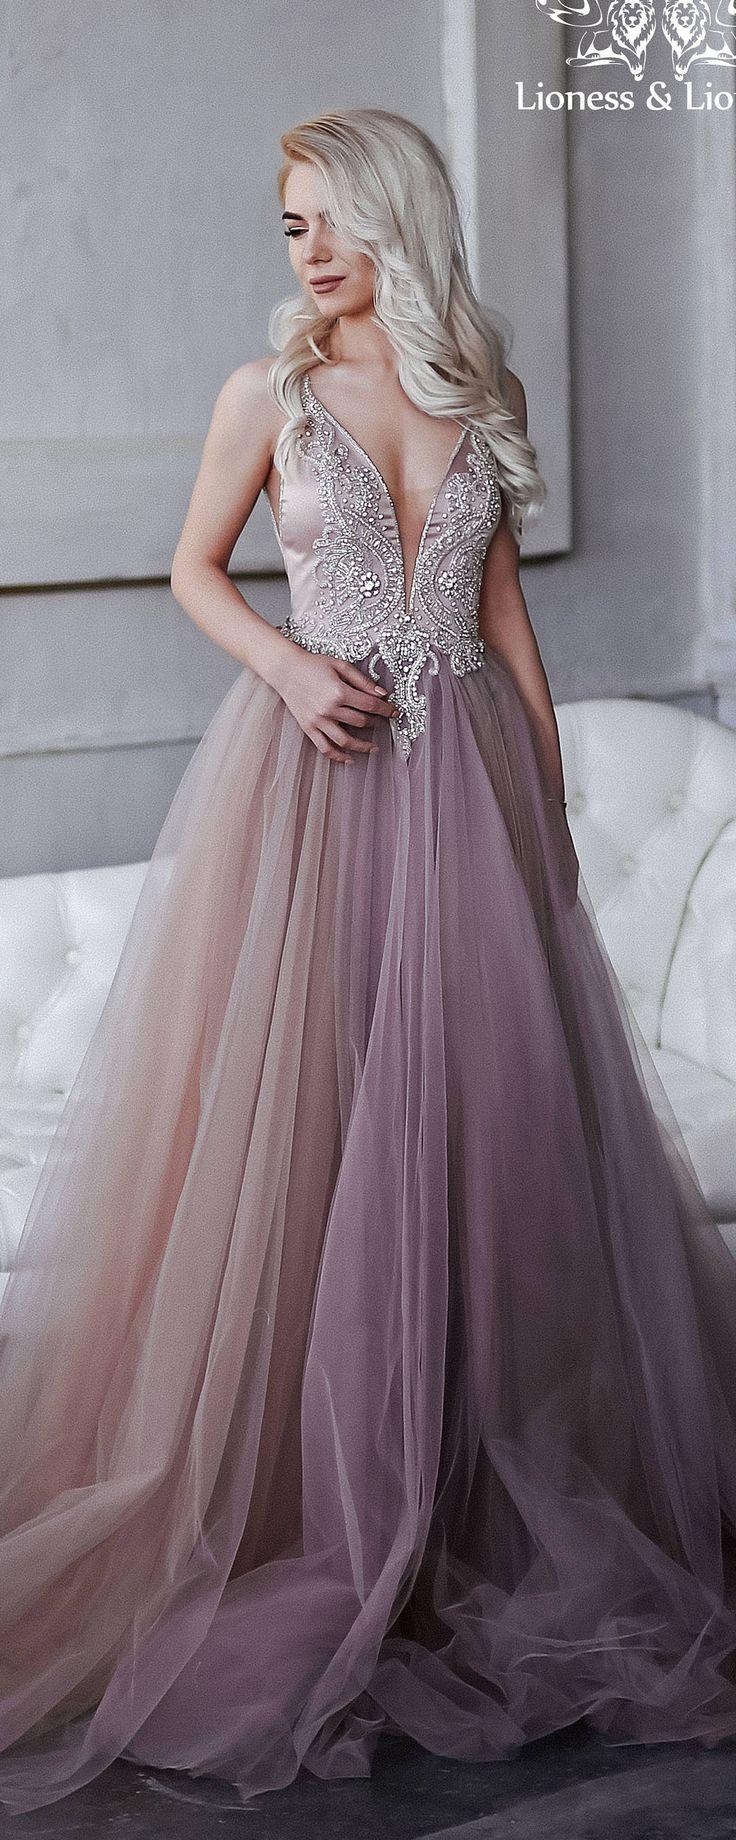 Mariage - Wedding Dress Of Extraordinary Smoky Purple, Hand-embroidered Crystals, Lush Tulle Skirt, An Open Back / Prom Dress / Evening Dress / Kristi